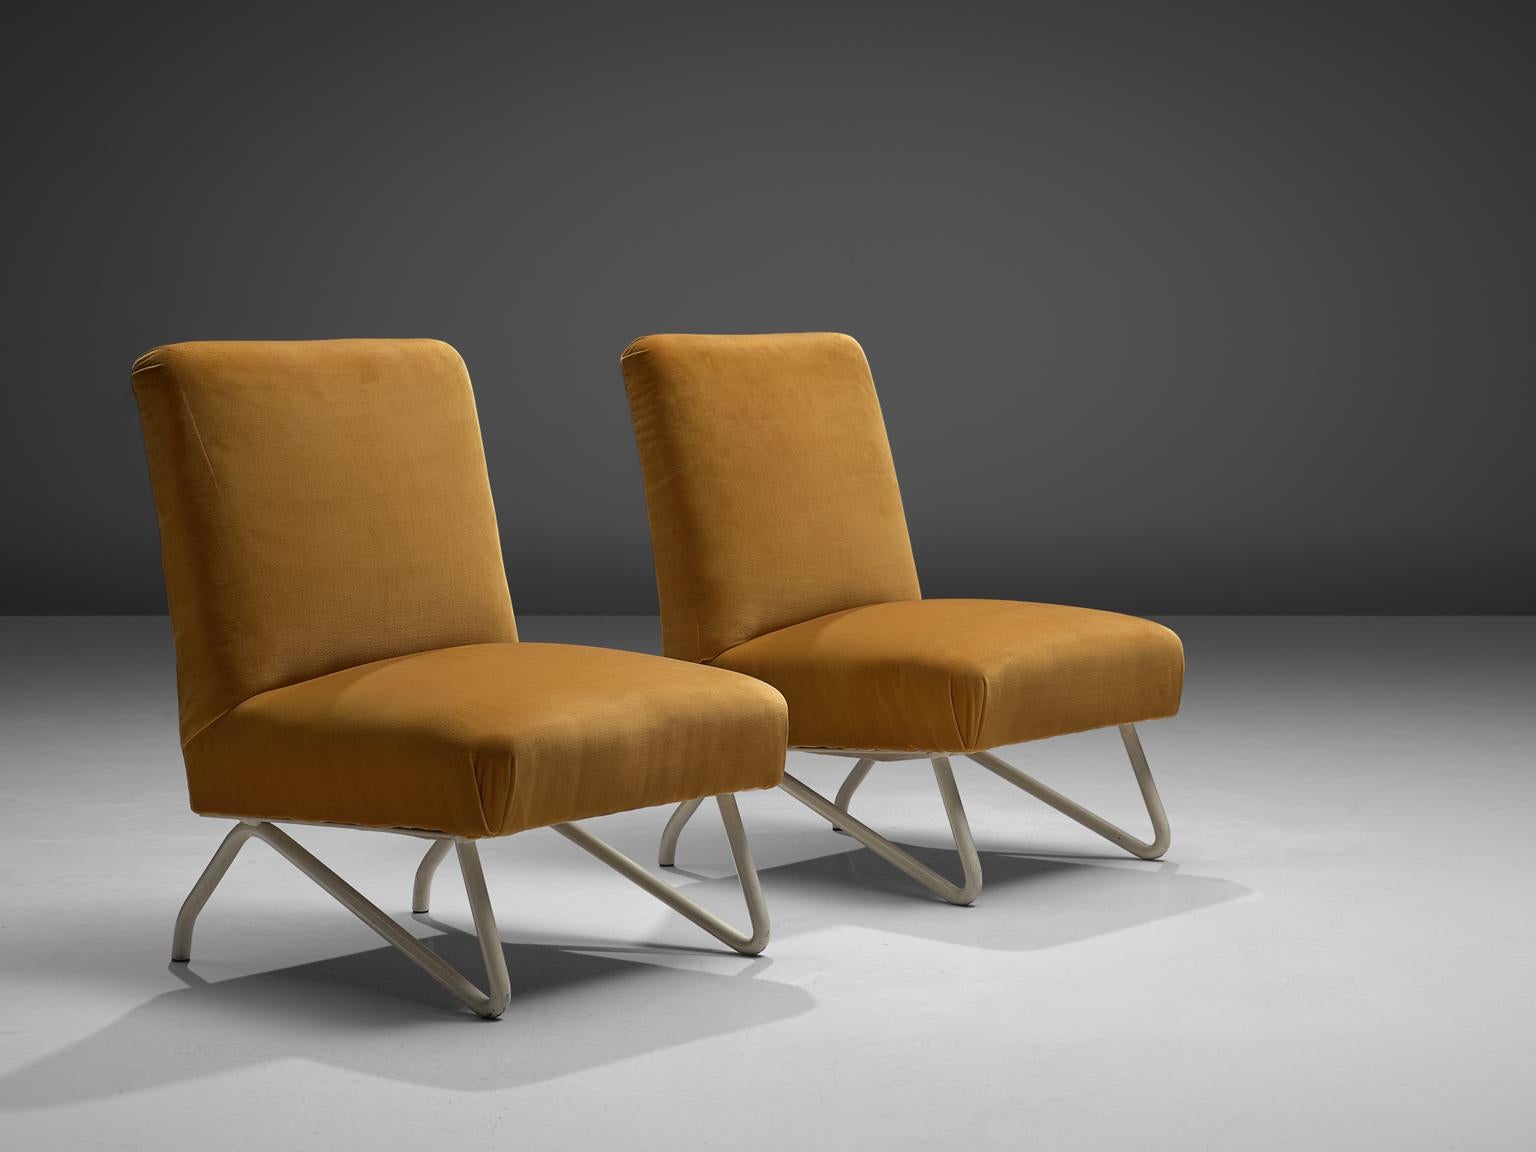 Set of 2 easy chairs, velvet, metal, Italy, 1960s

The design of these Italian lounge chairs is basic and well proportioned. The straight lines of the seat and back combine well with the playful tubular white metal frame. 

The original